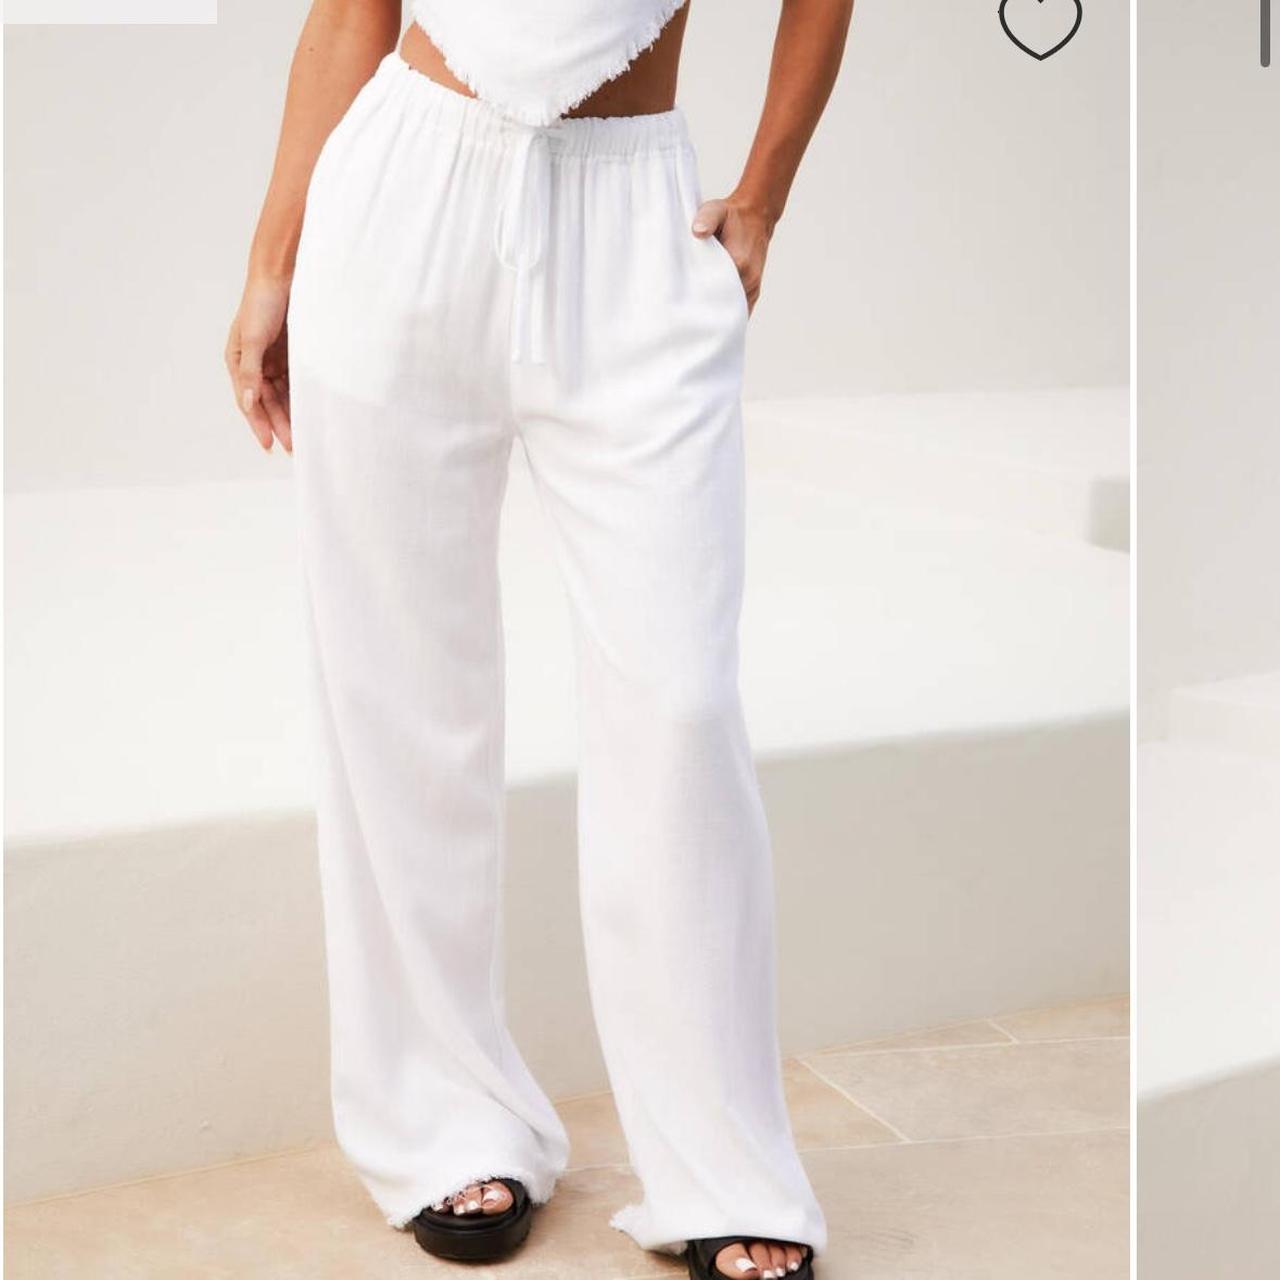 White Linen Beach Pants Brand new with tags Size 8... - Depop